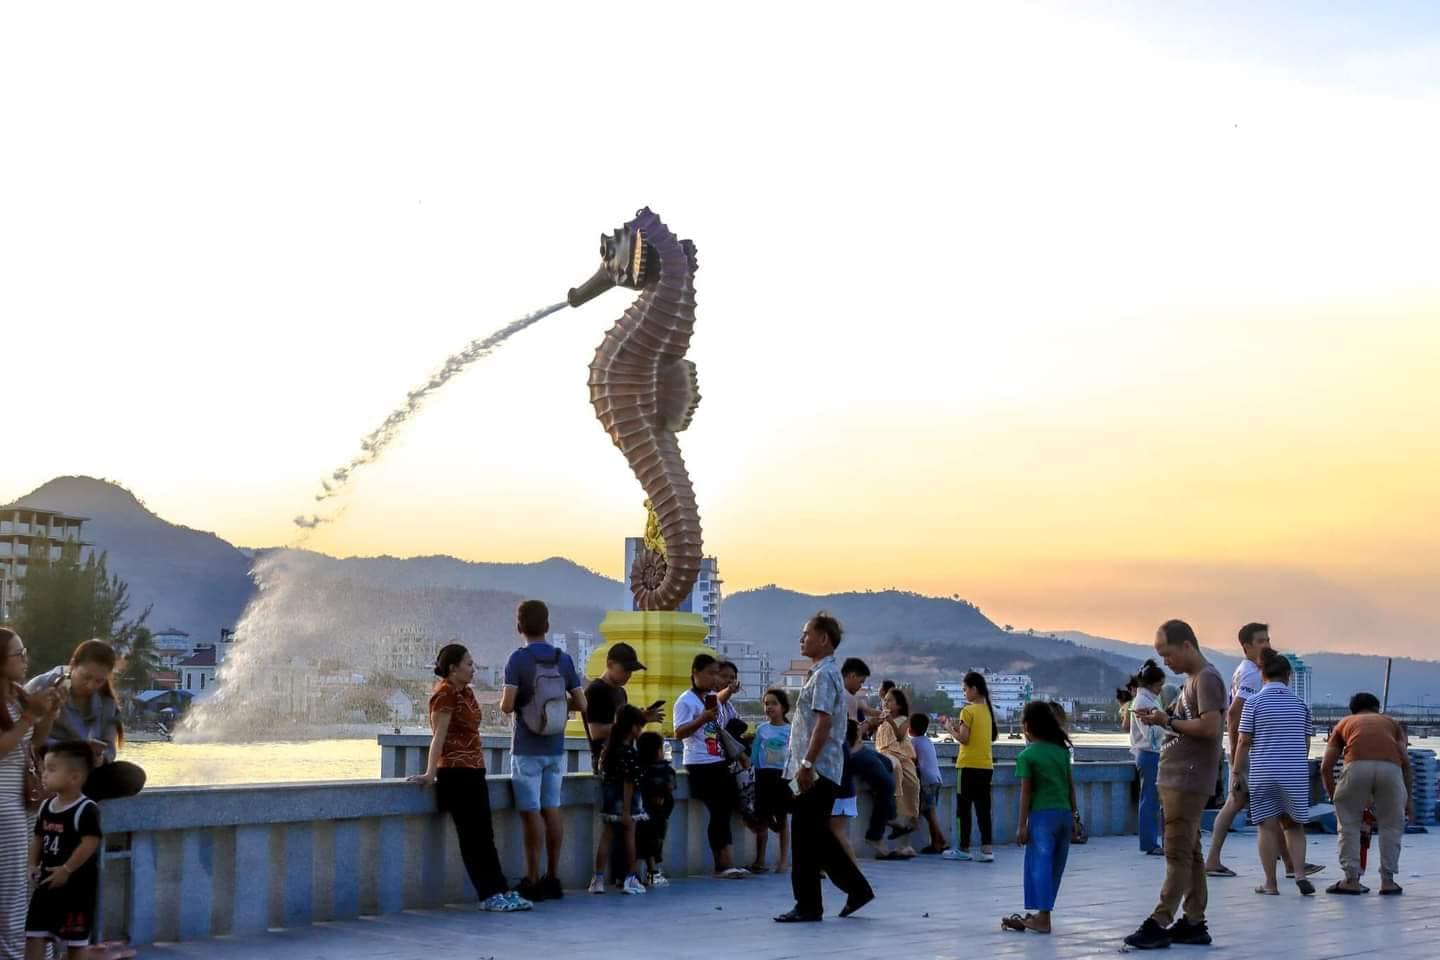 8-metre seahorse statue in Cambodia bears striking resemblance to Merlion